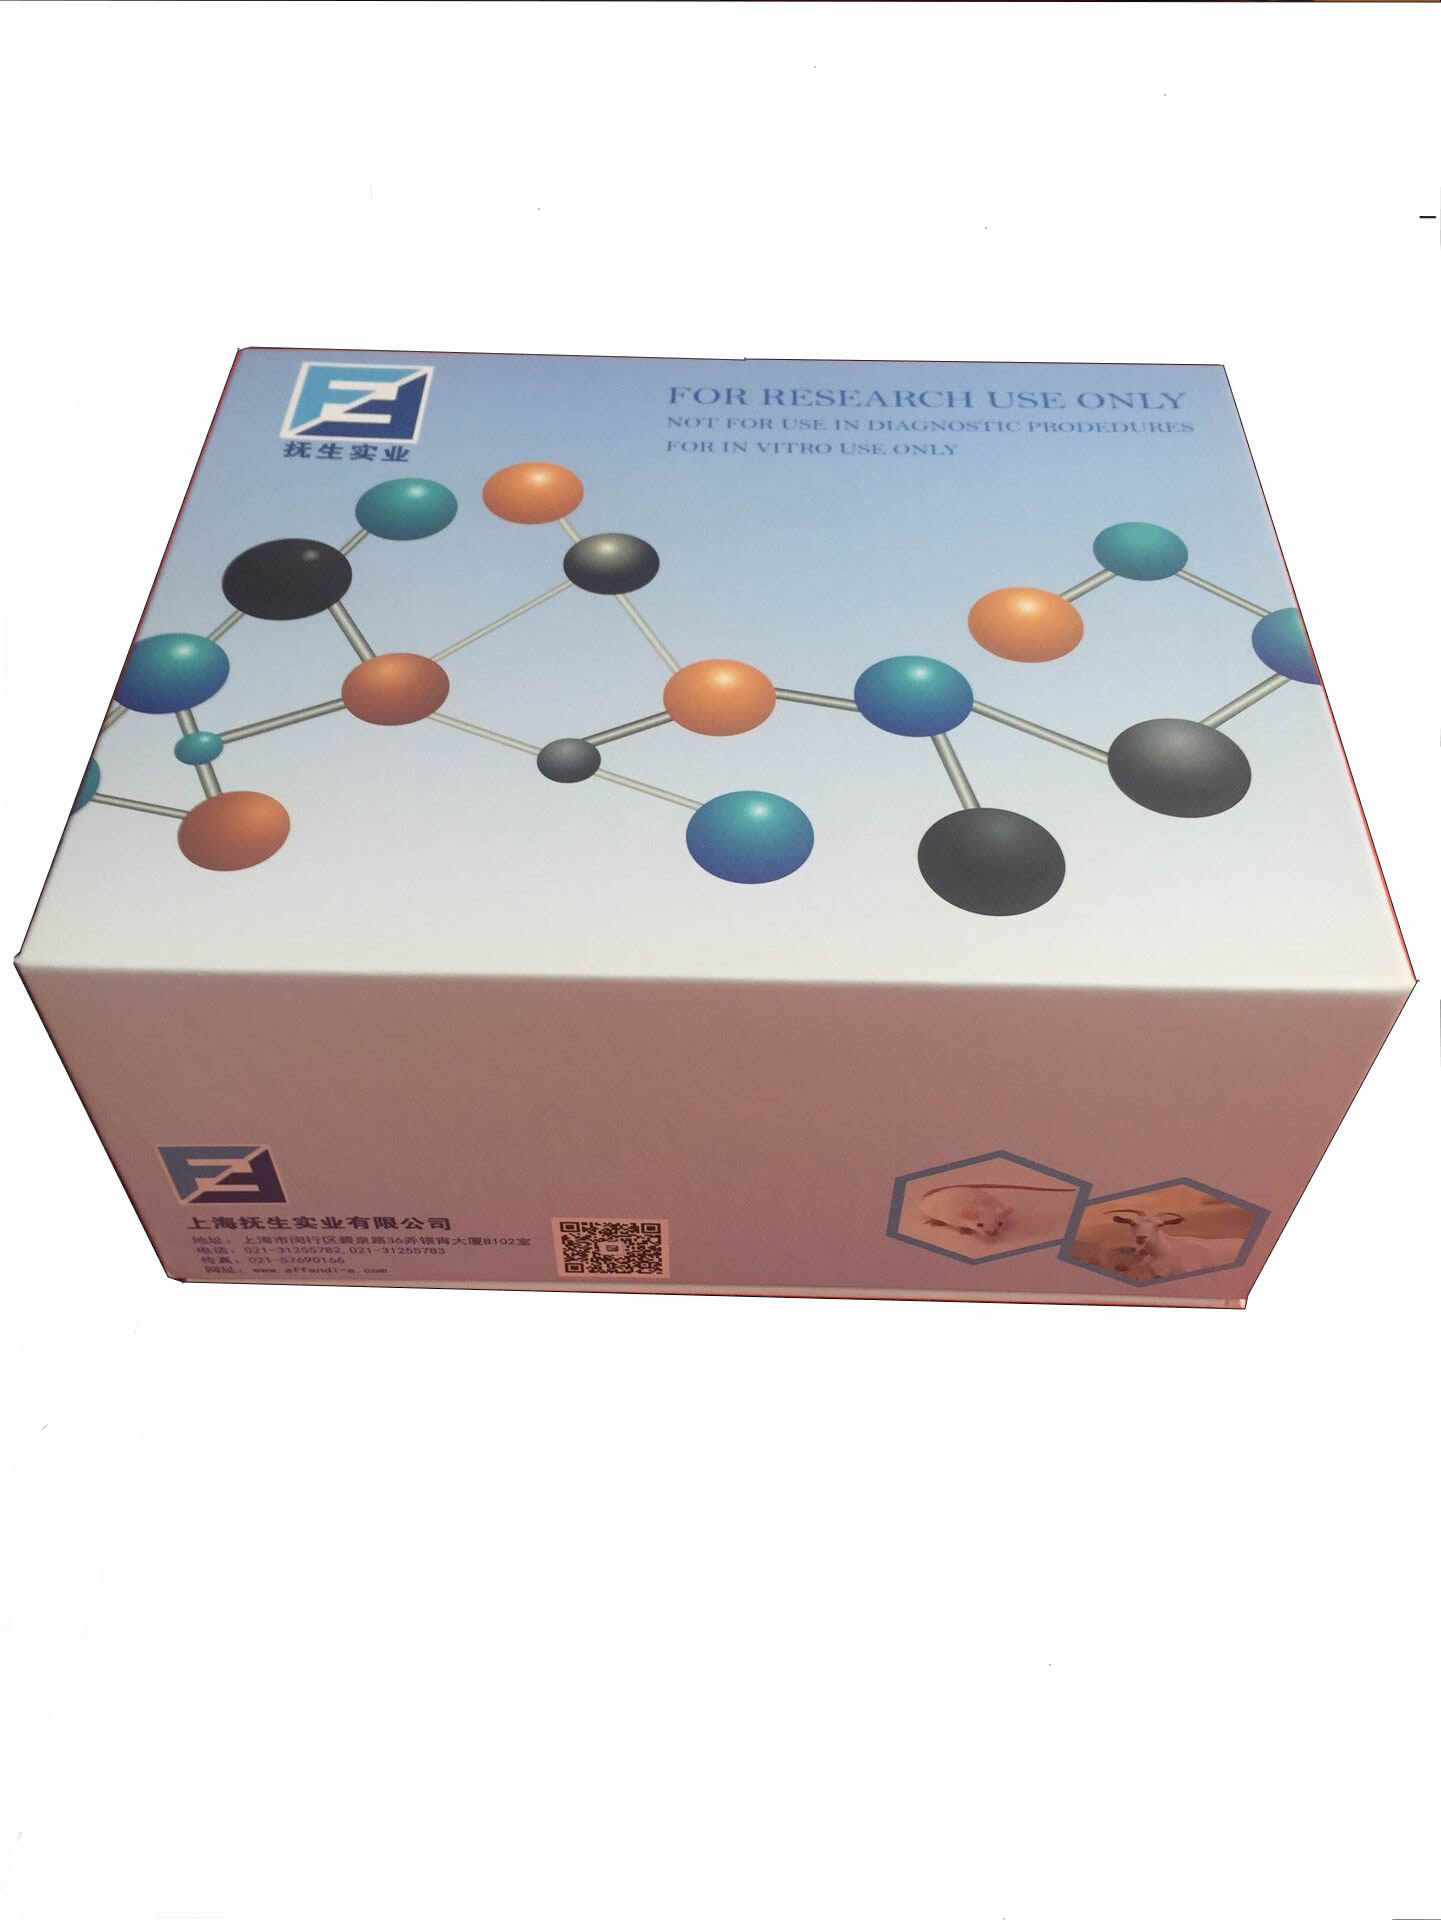 FOR Proteinase-activated receptor 2 ELISA Kit